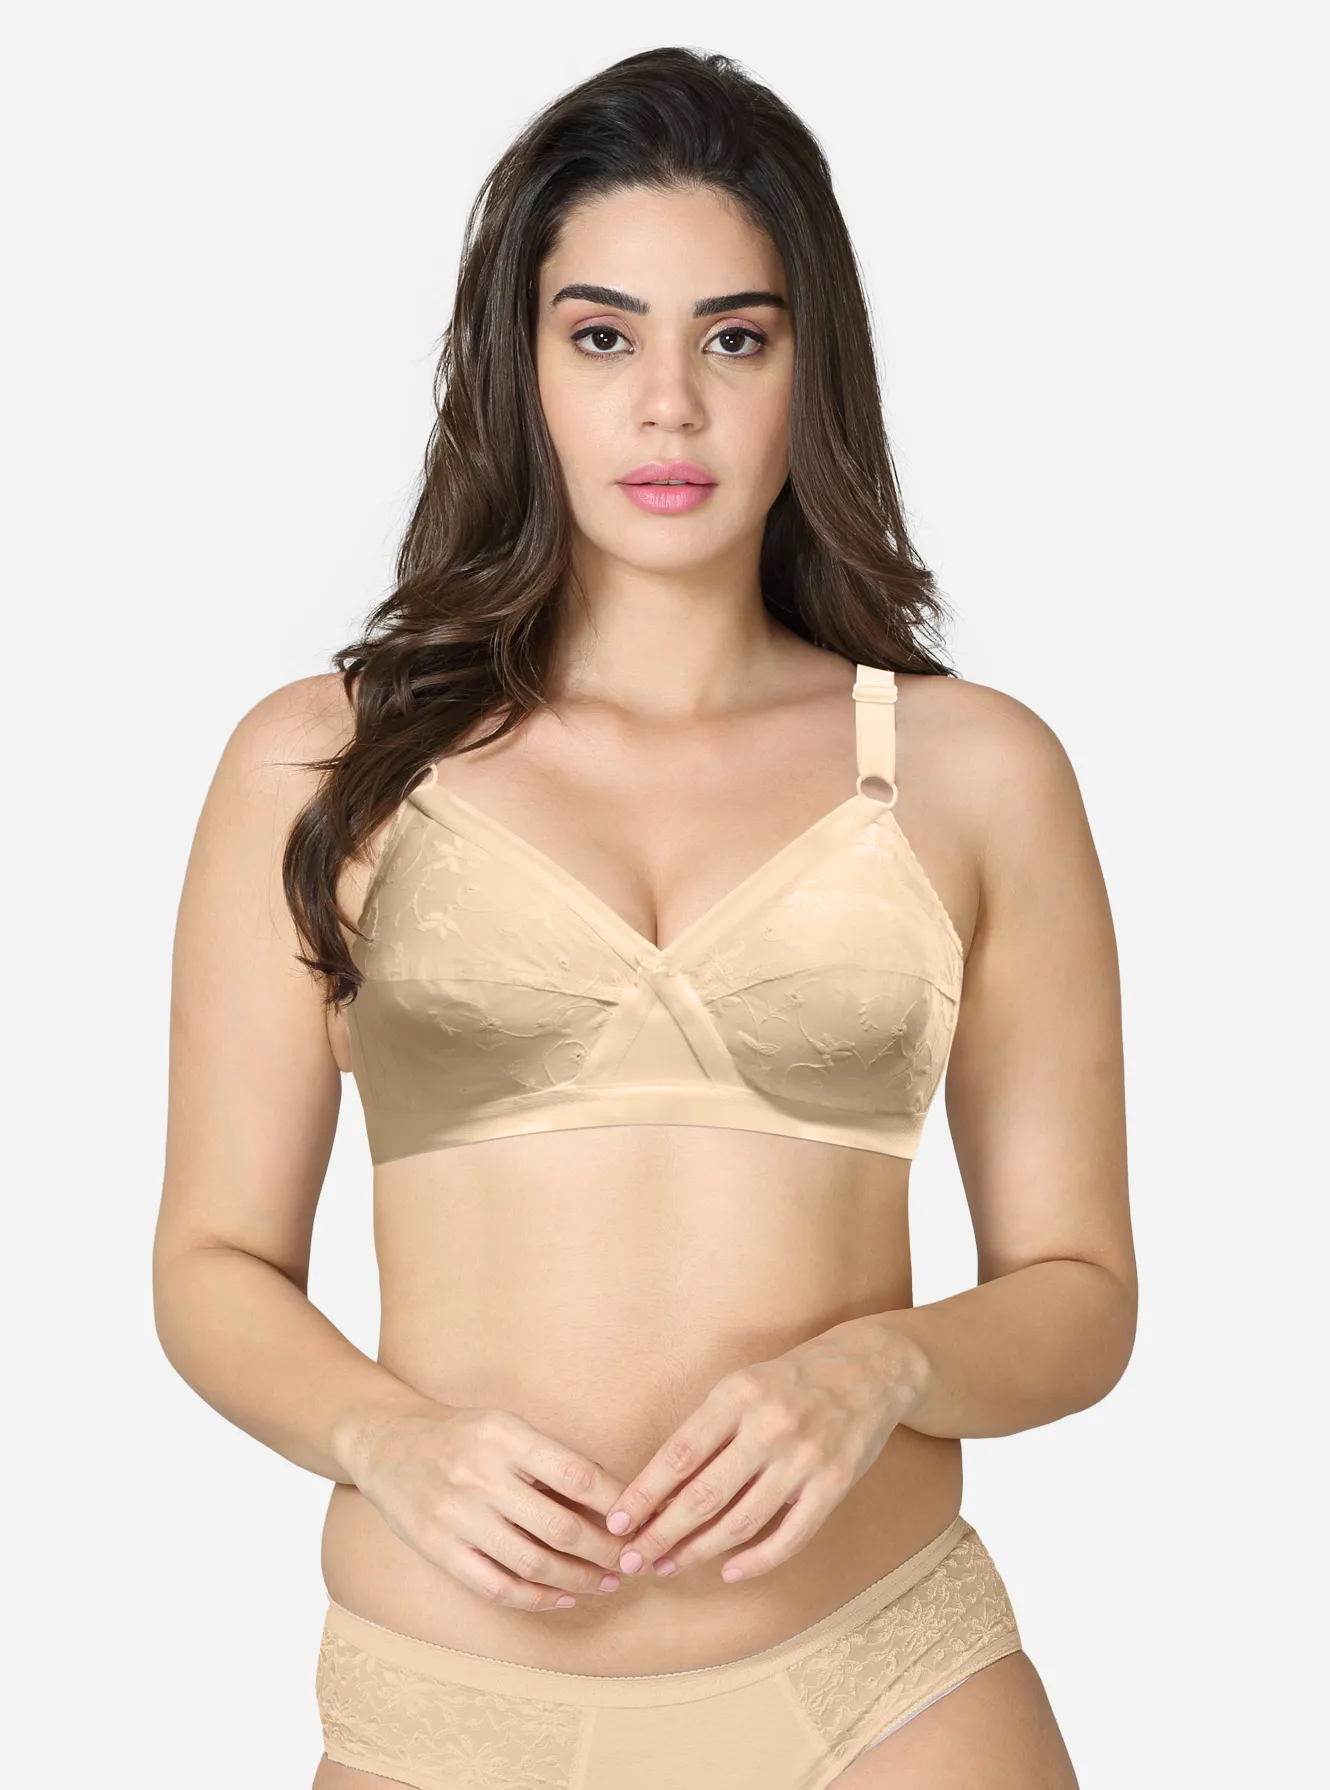 Full Coverage 38E, Bras for Large Breasts